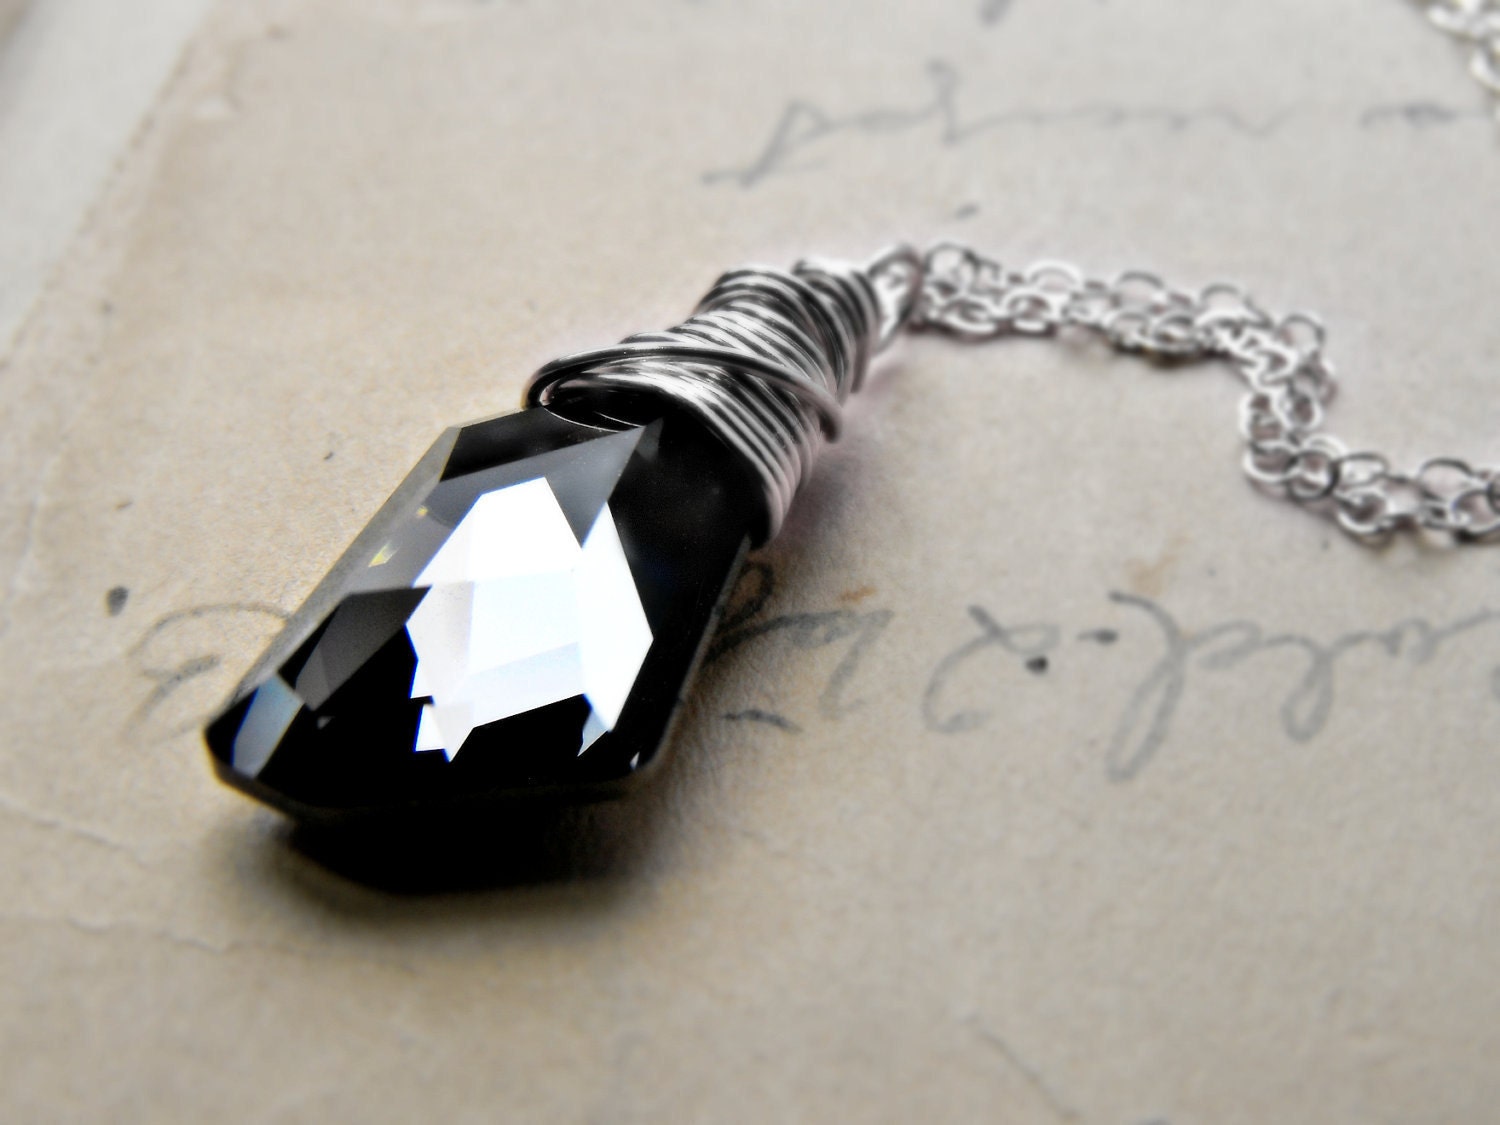 Crystal Necklace, Swarovski Crystal Wire Wrapped Sterling Silver Pendant and Chain Black Diamond